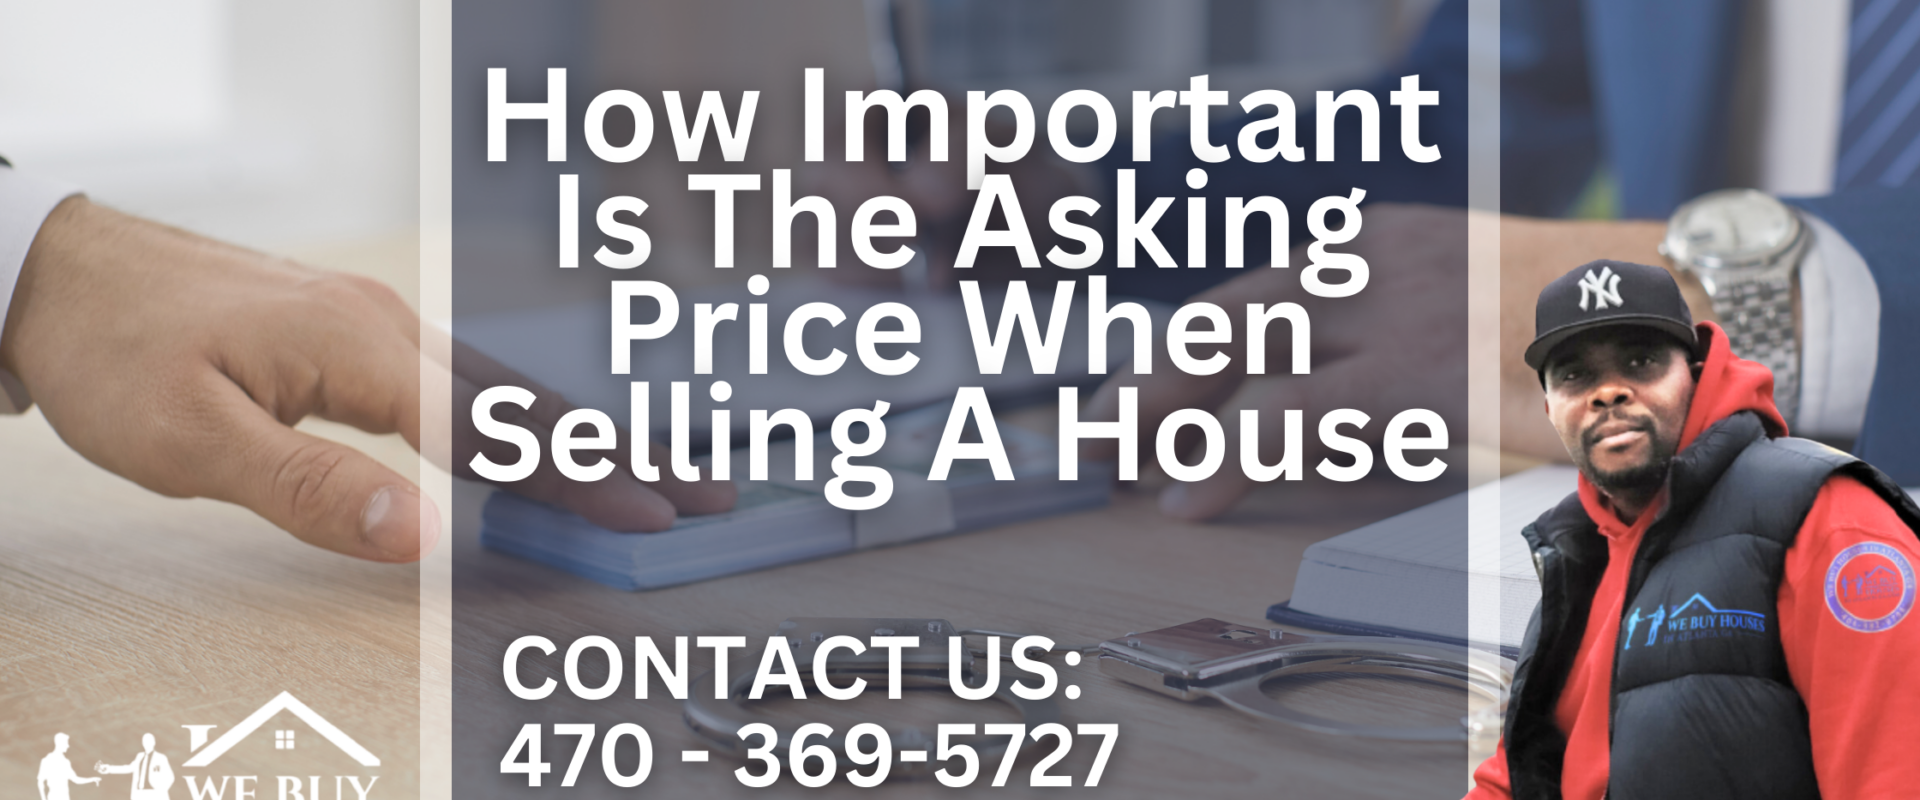 How Important Is The Asking Price When Selling A House